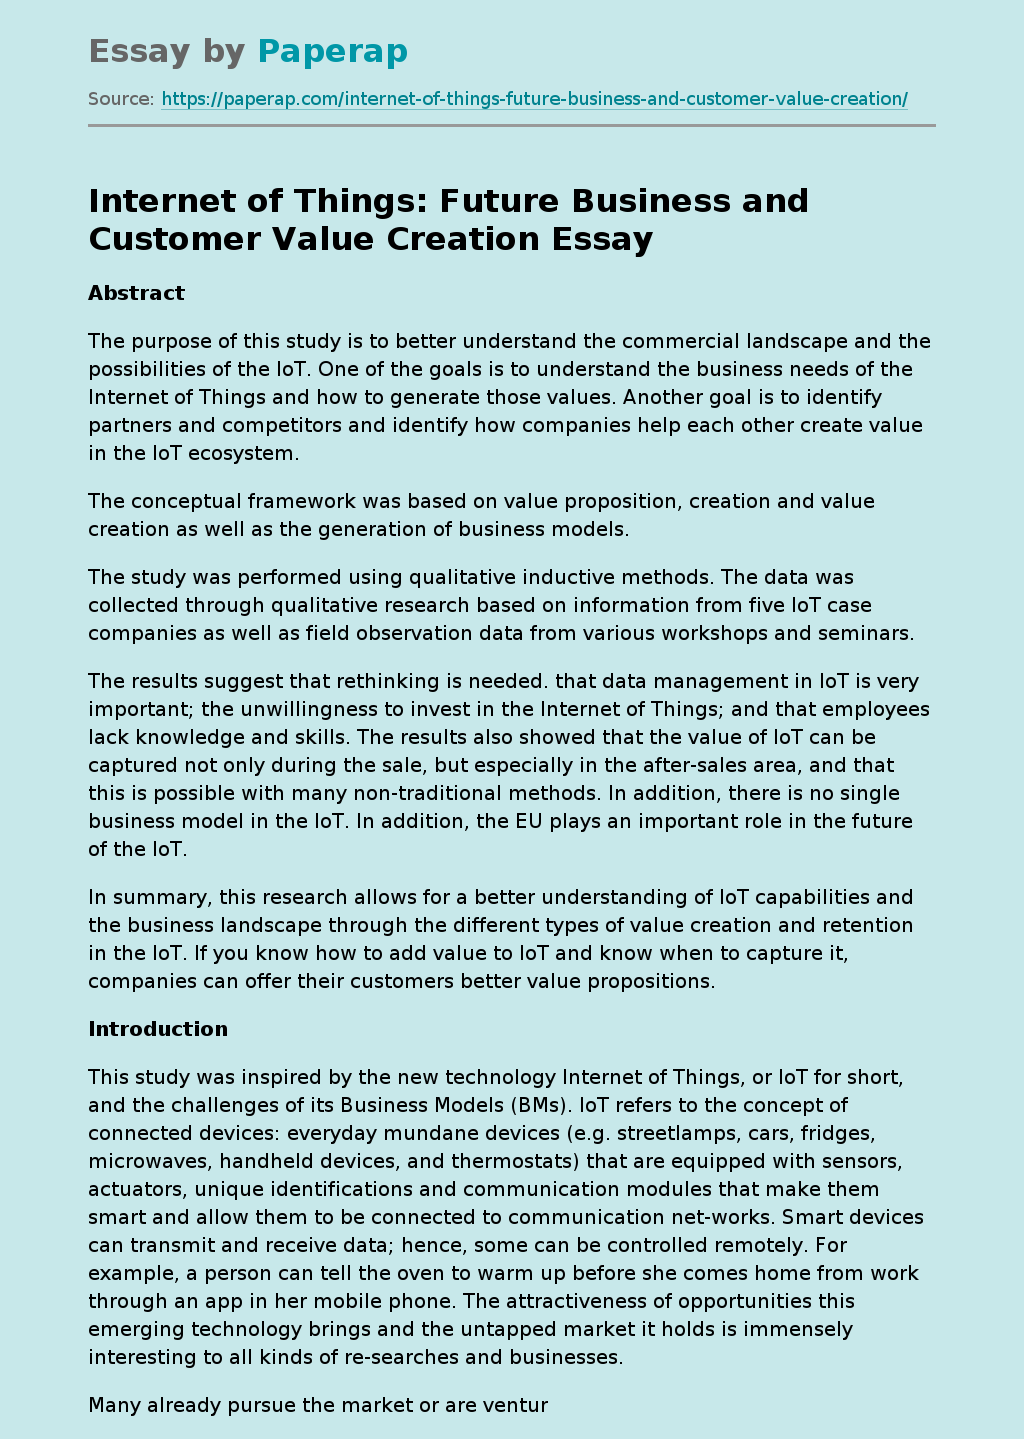 Internet of Things: Future Business and Customer Value Creation